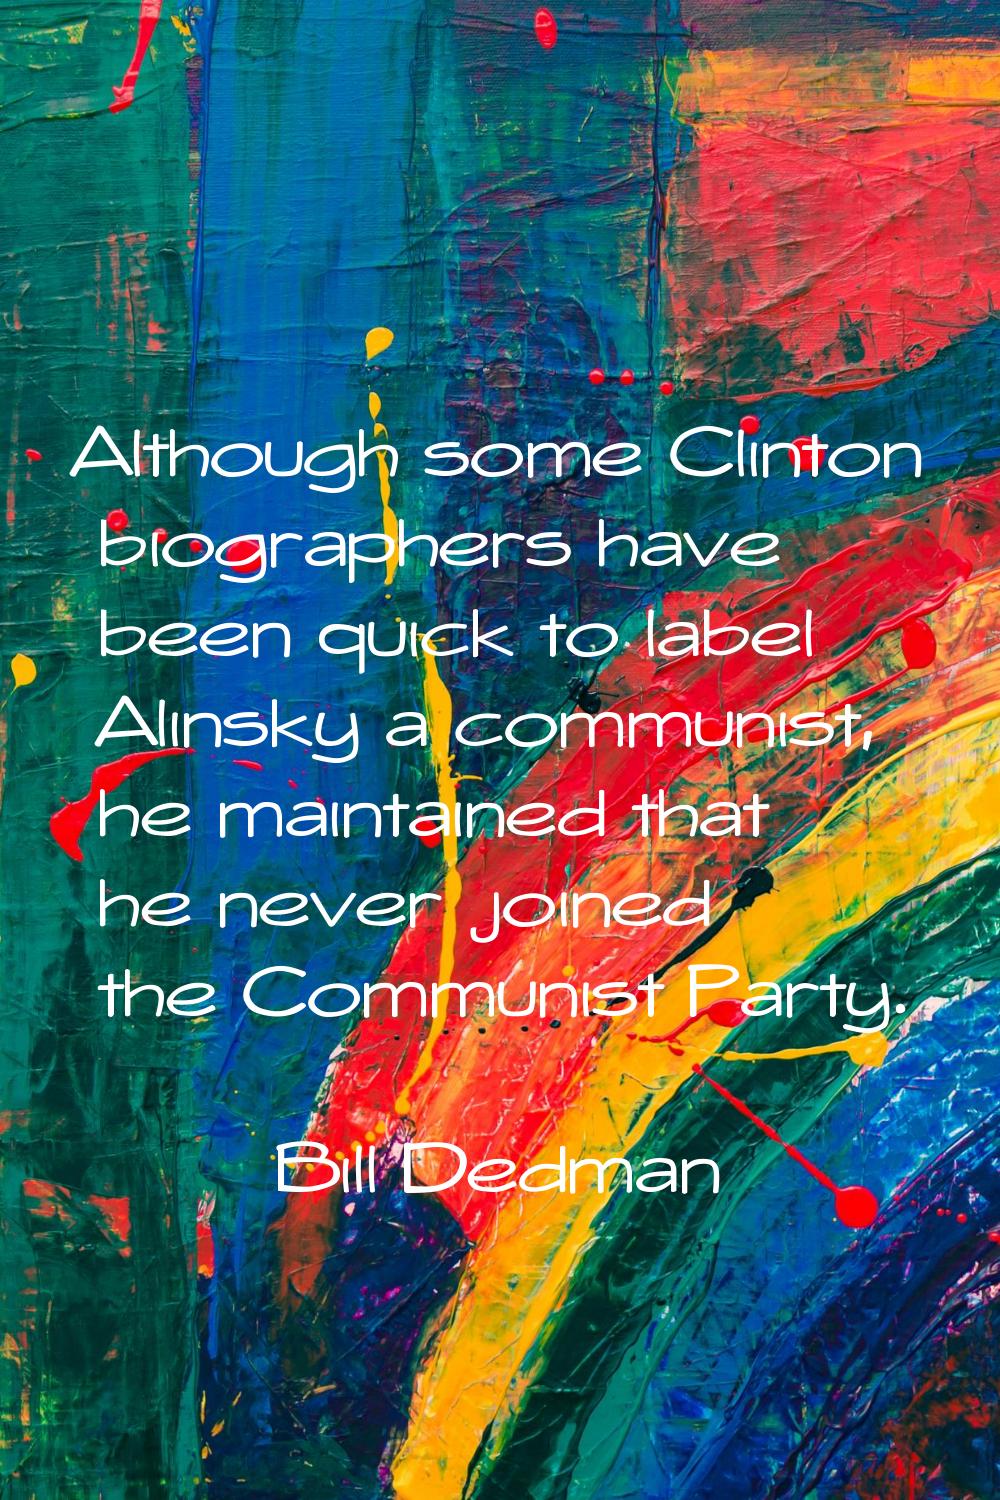 Although some Clinton biographers have been quick to label Alinsky a communist, he maintained that 